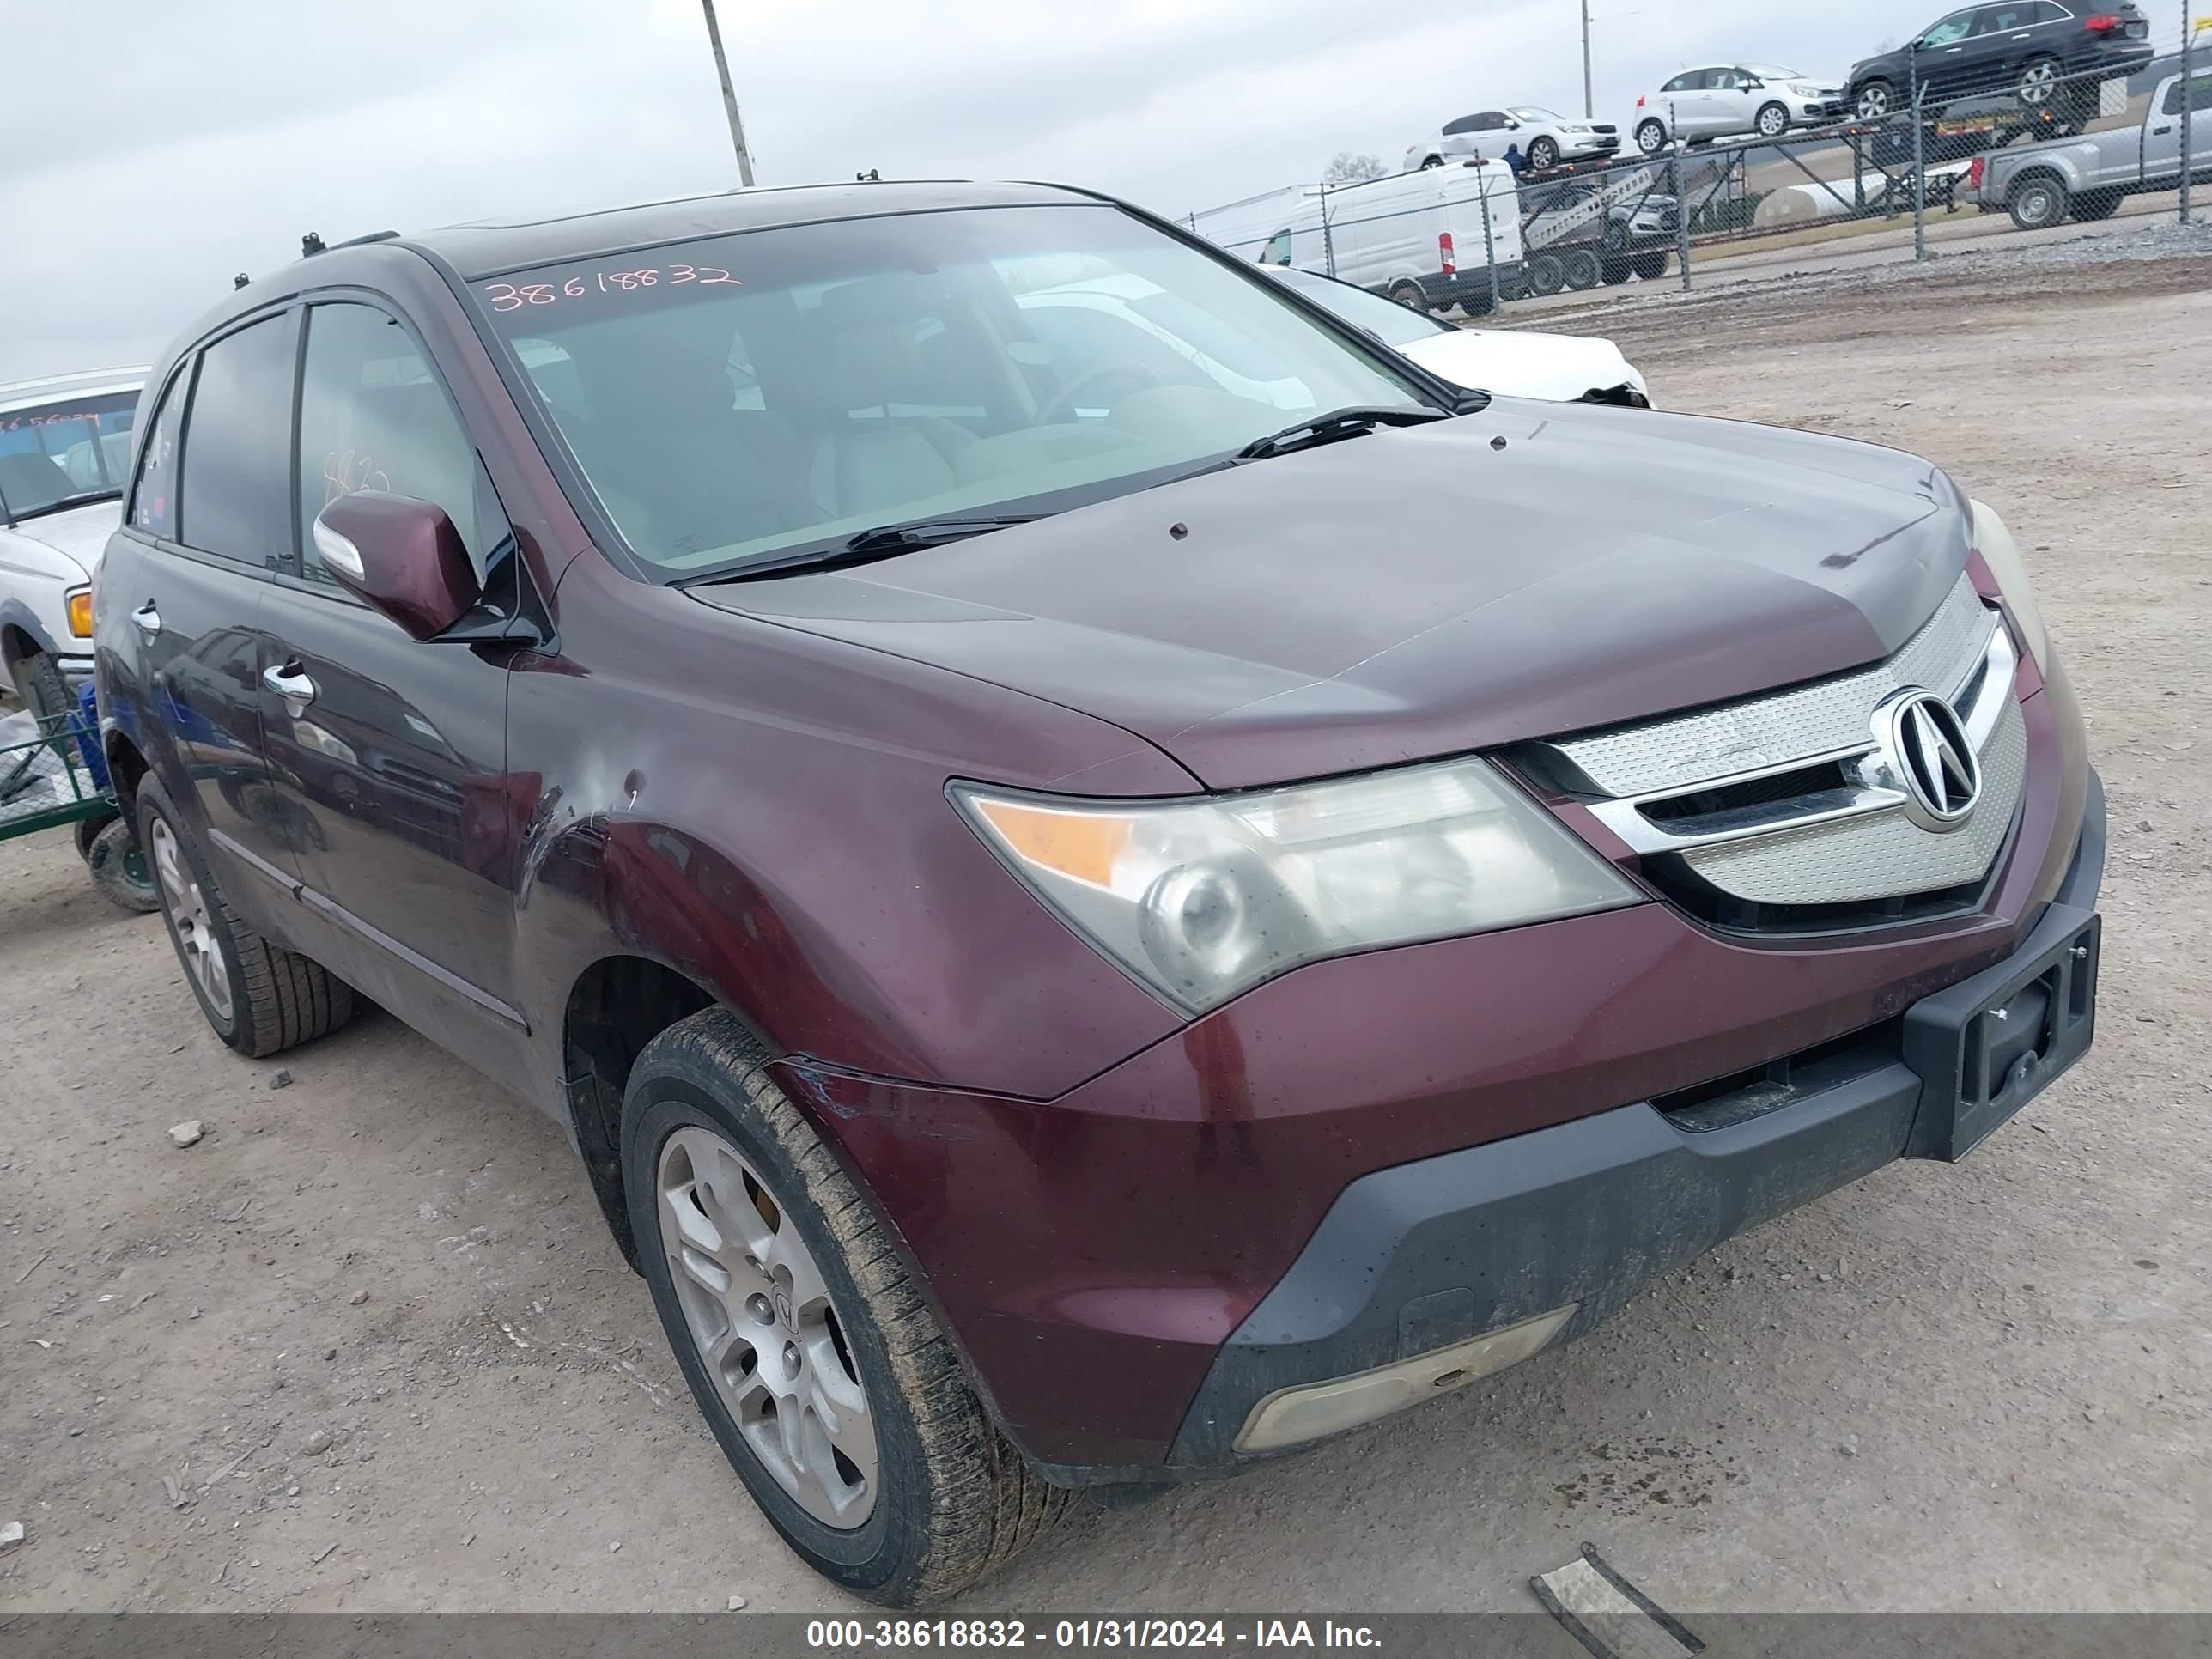 vin: 2HNYD28449H502460 2HNYD28449H502460 2009 acura mdx 3700 for Sale in 17372, 10 Auction Drive, Latimore Township, Pennsylvania, USA